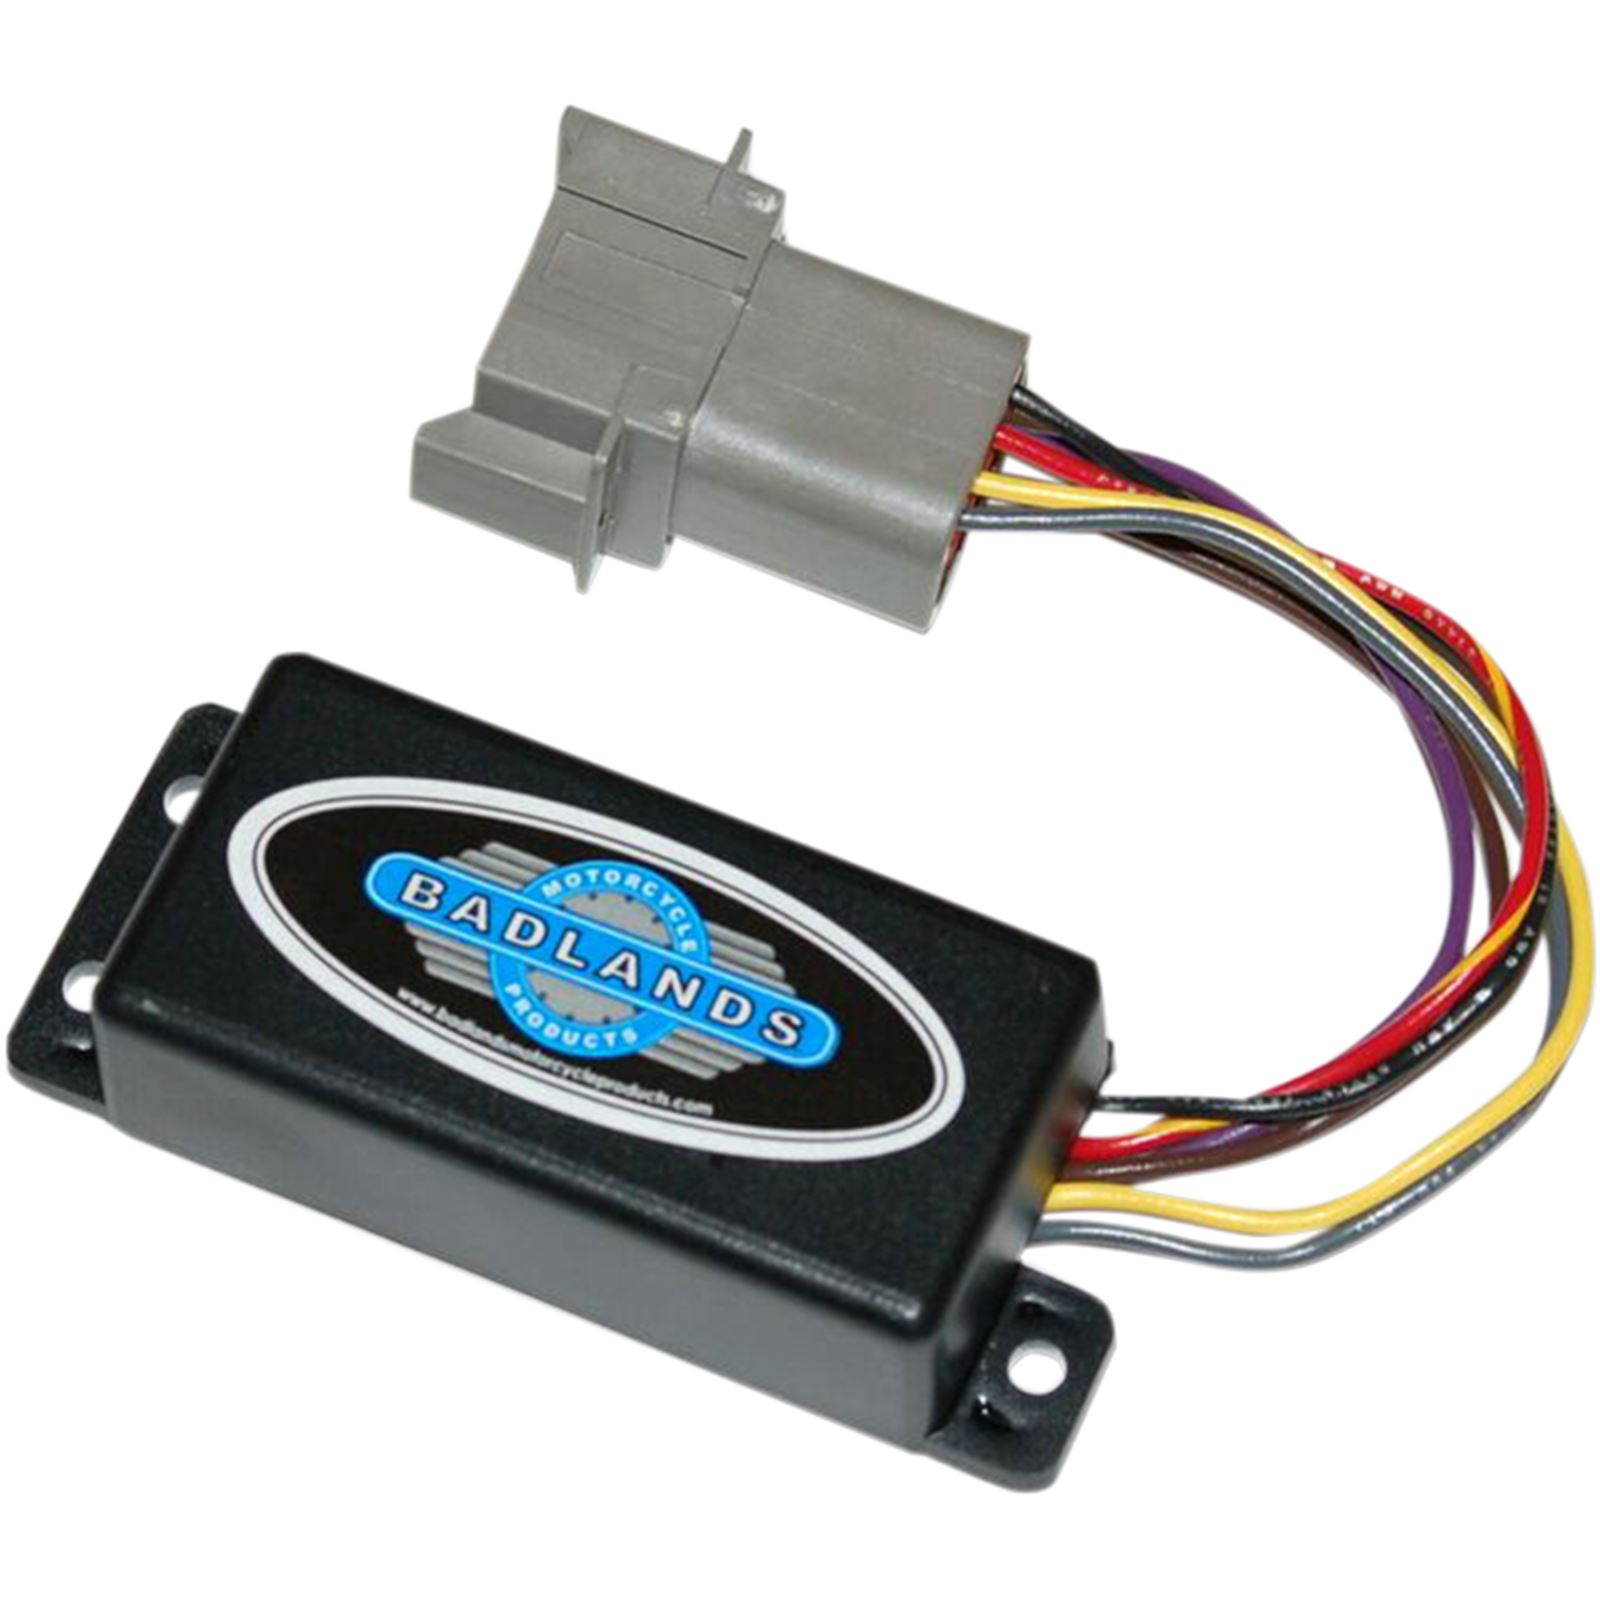 Badlands M/C Products Turn Signal Auto-Canceller - 8 Pin